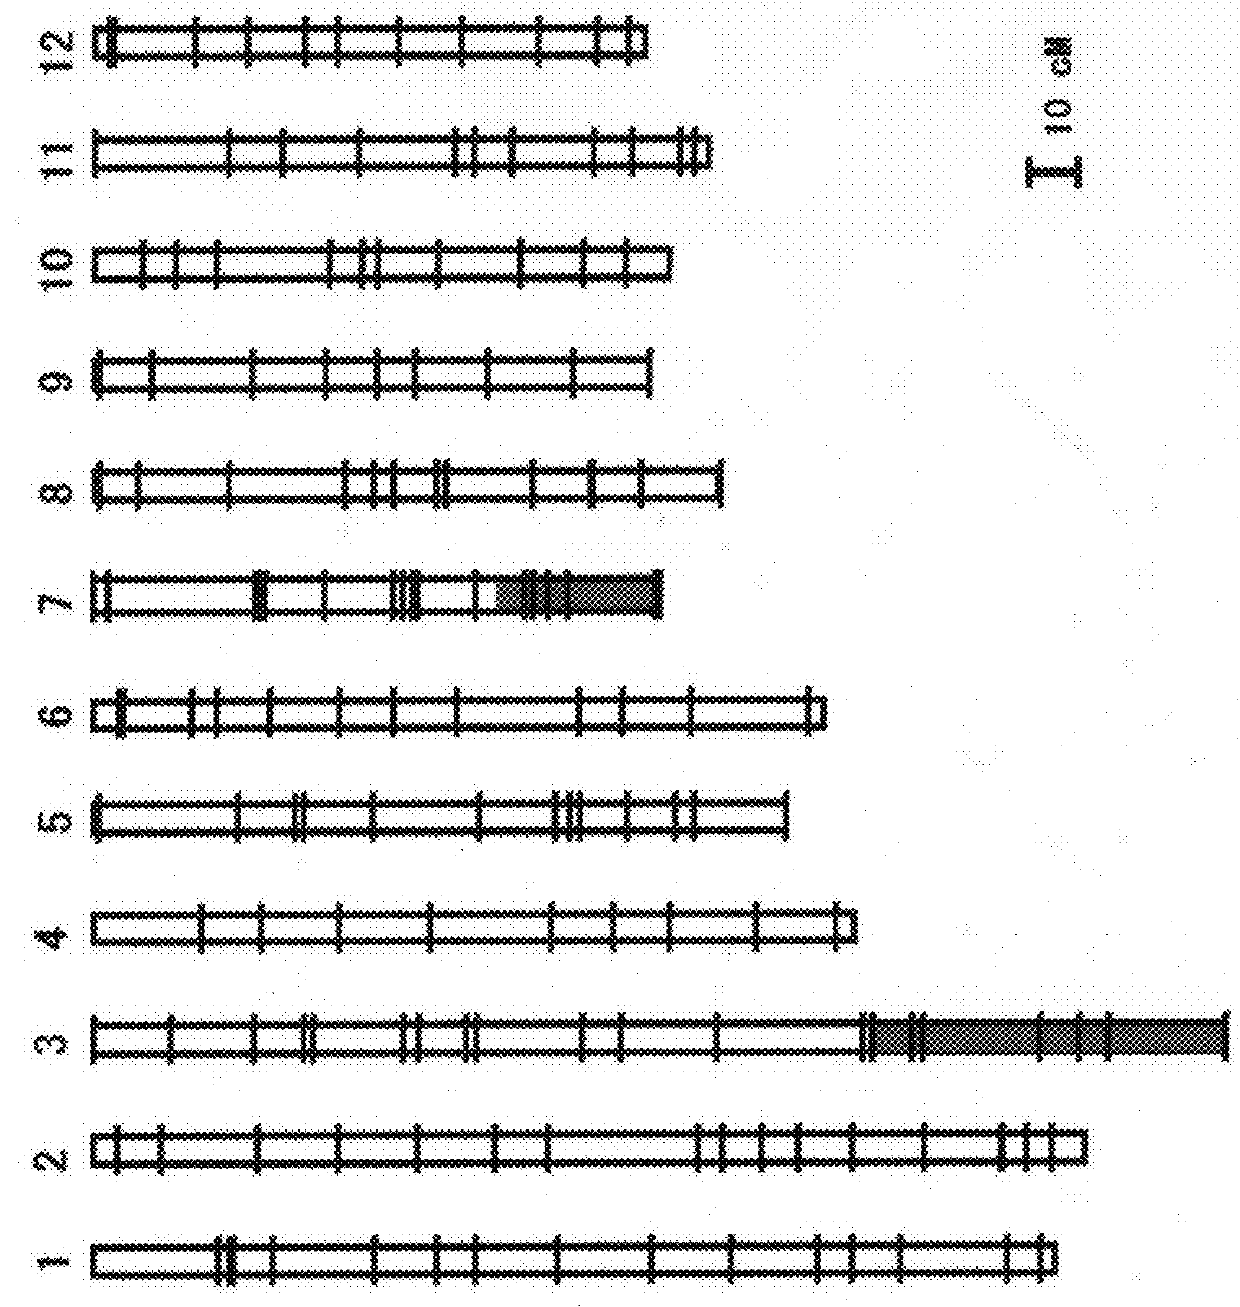 Nucleic acid imparting high-yielding property to plant, method for producing transgenic plant with increased yield, and method for increasing plant yield